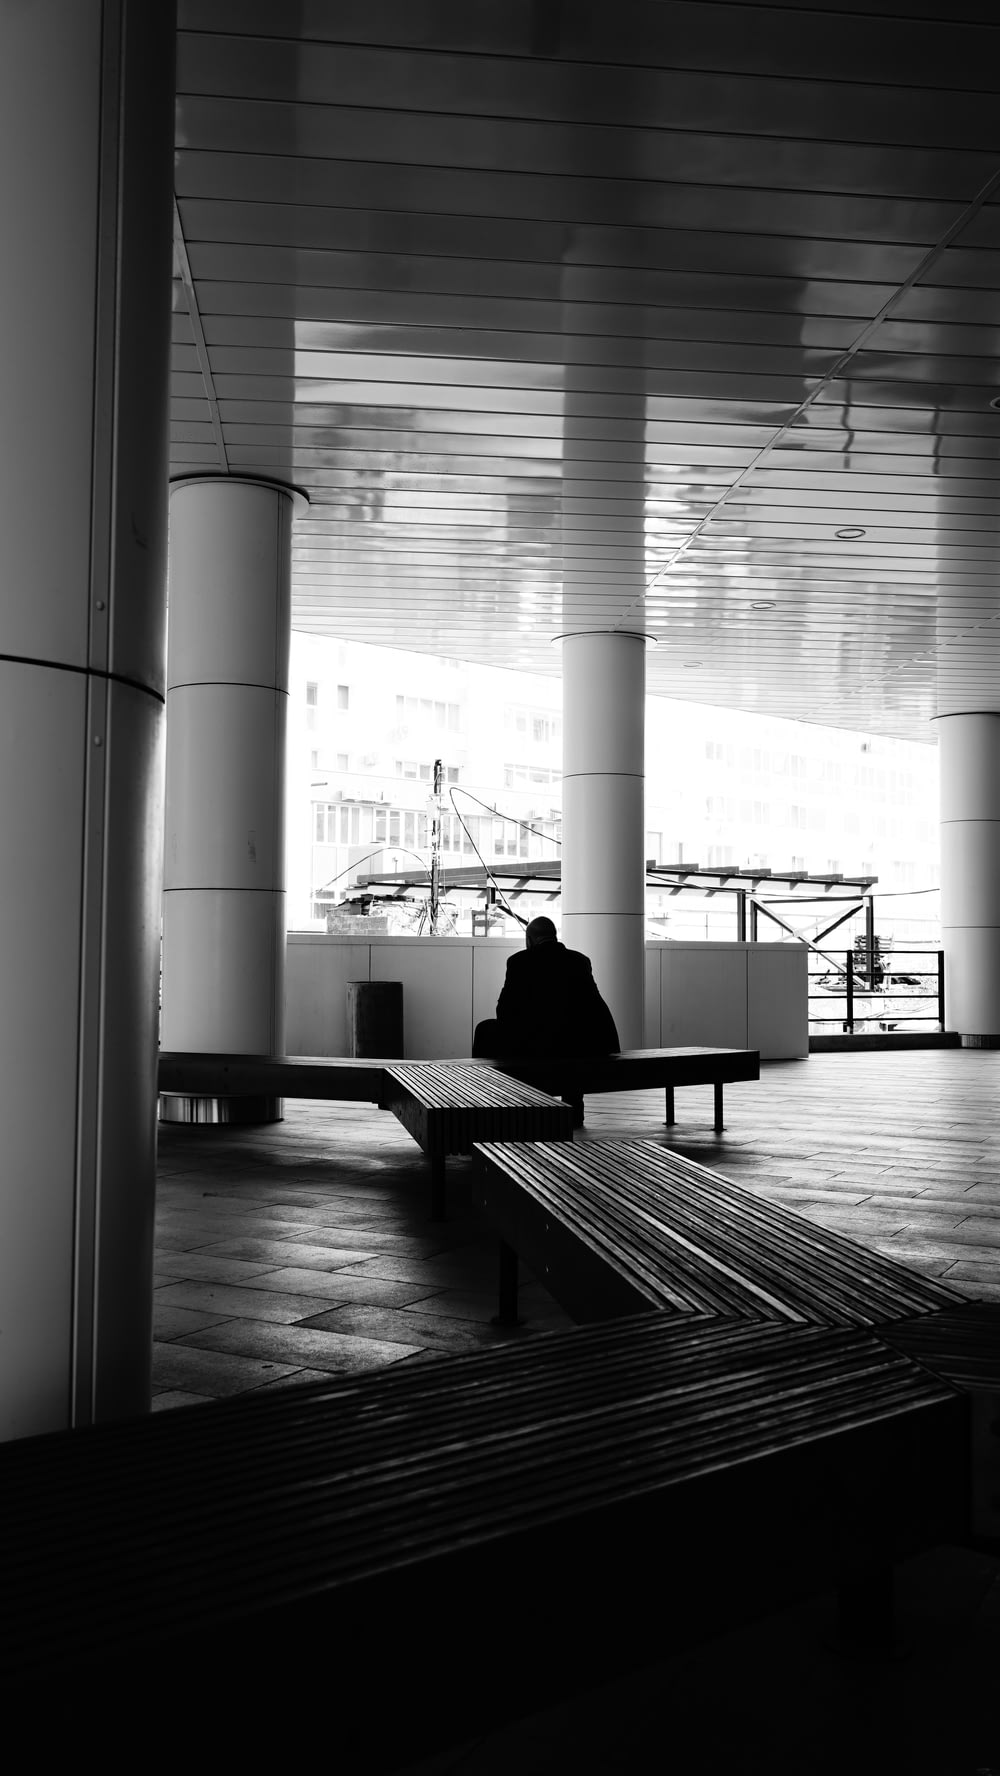 a person sitting on a bench in a building